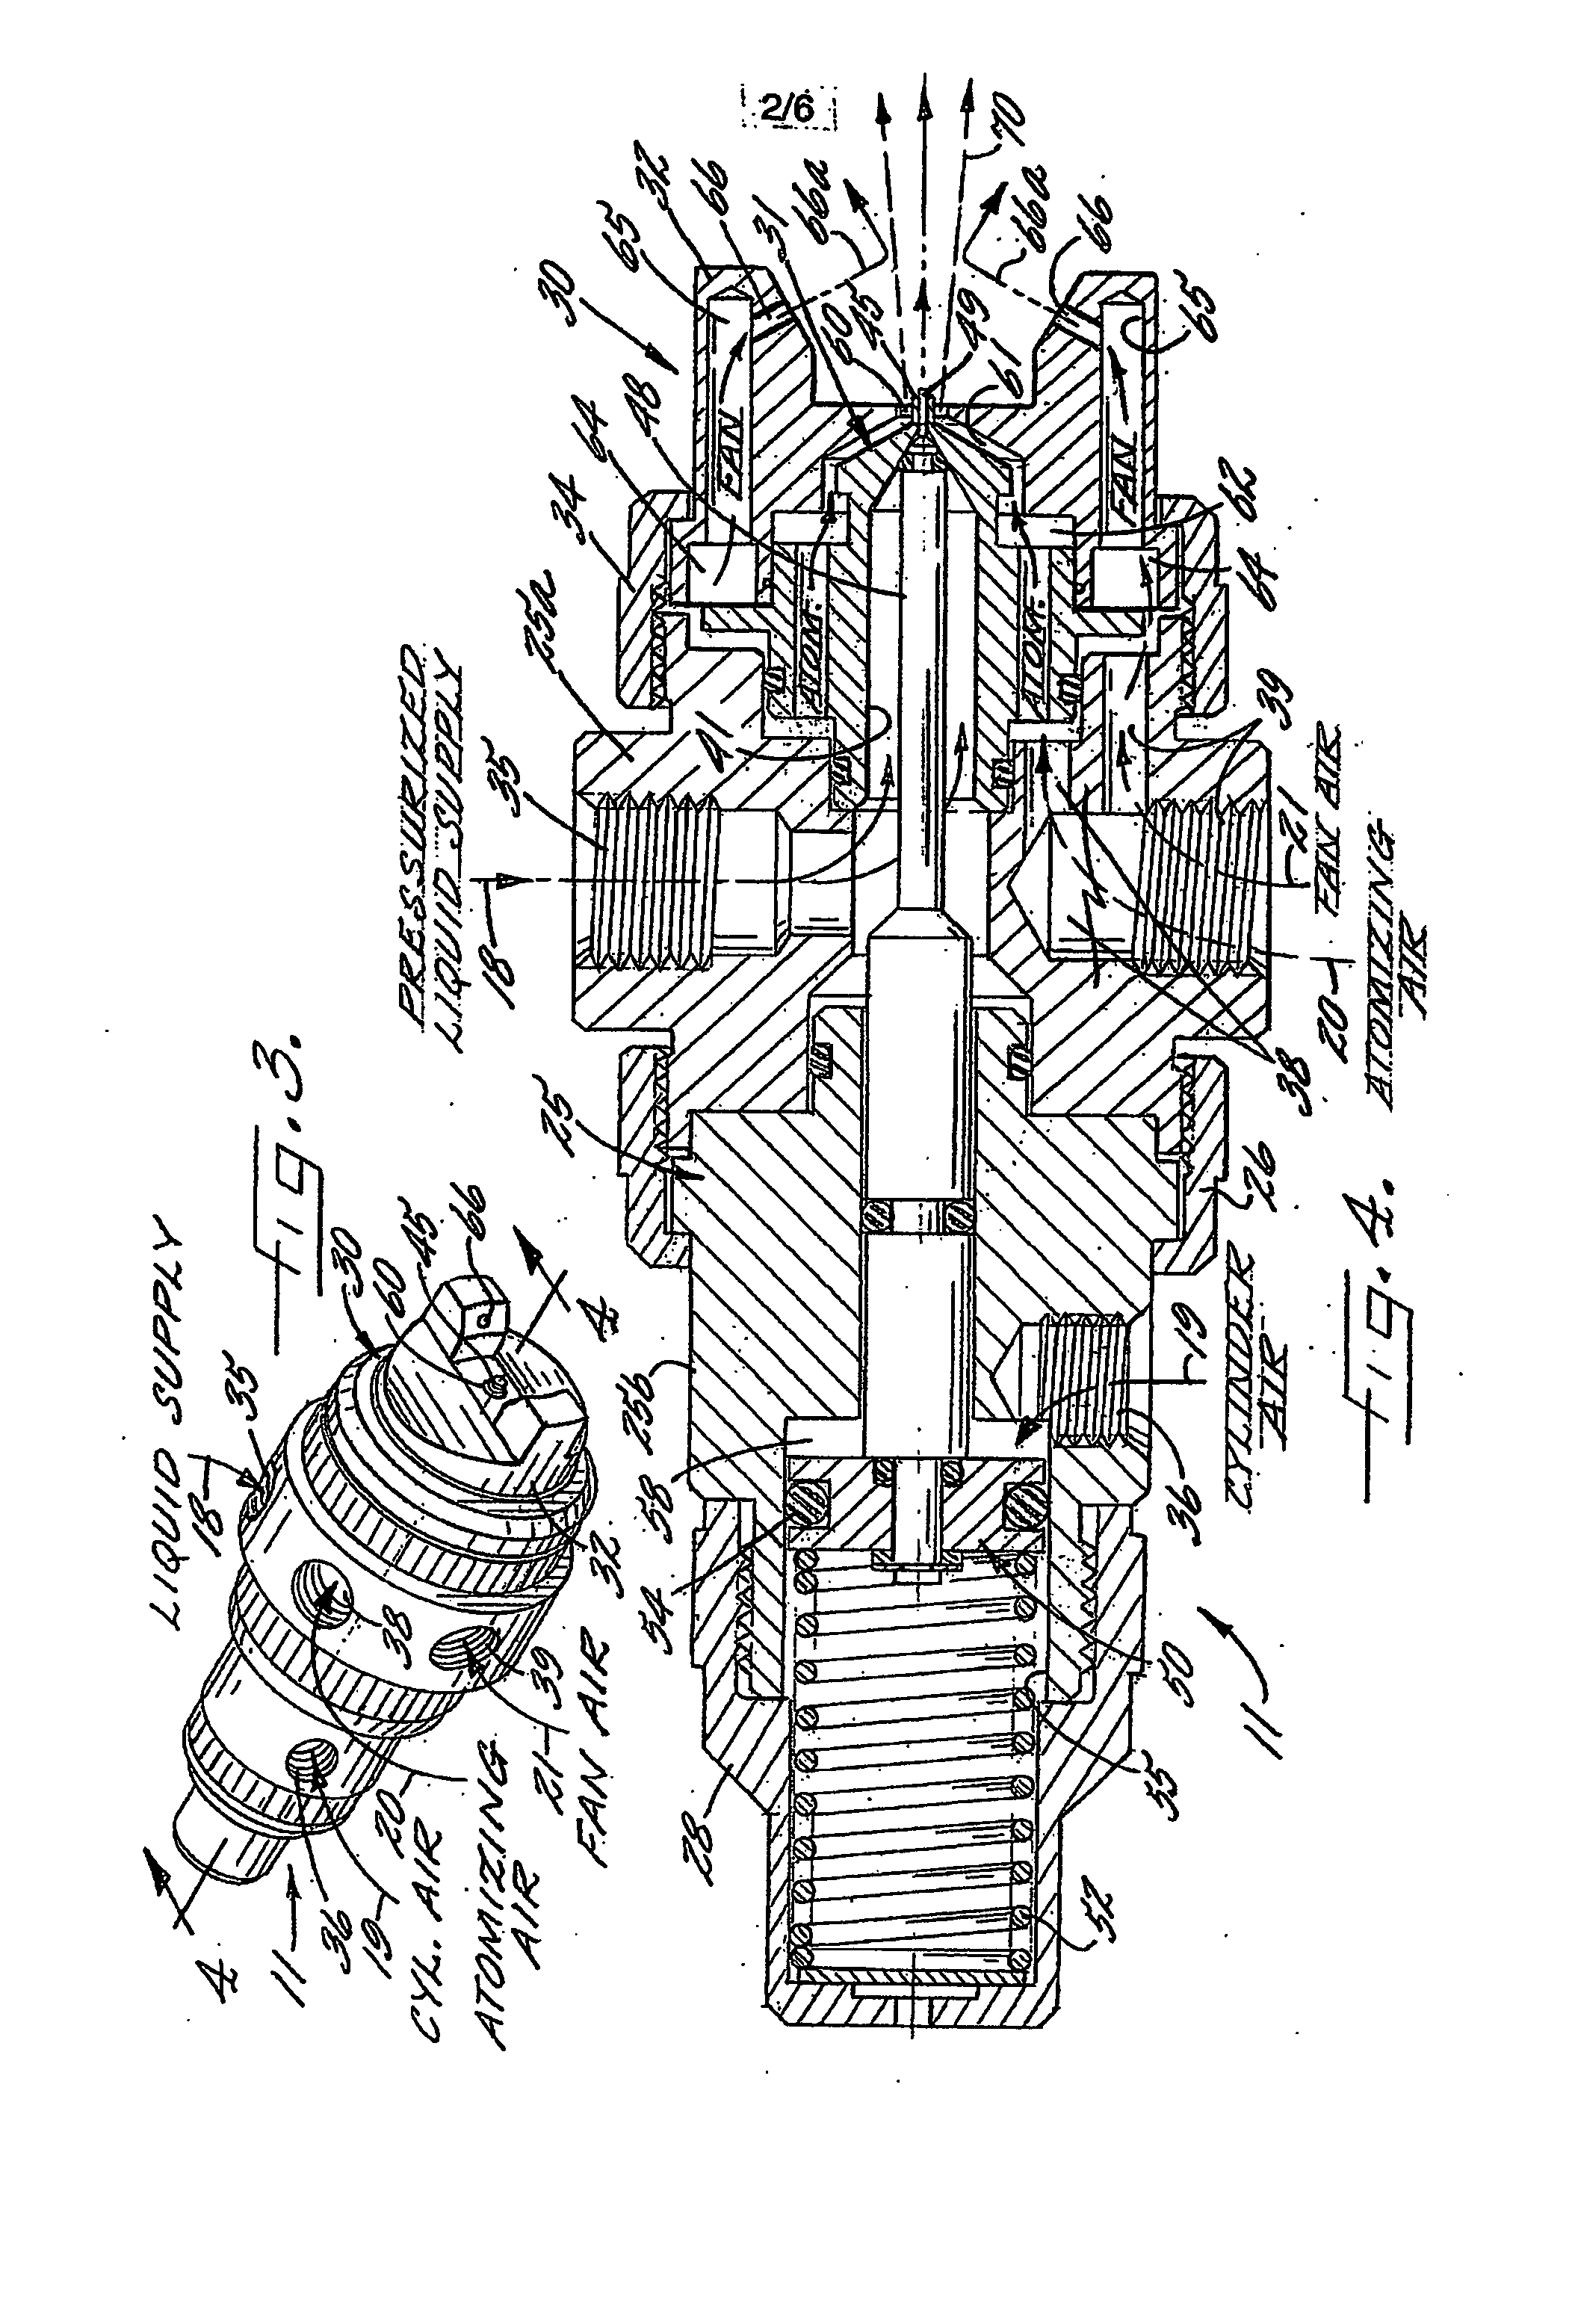 Spraying system for progressive spraying of non-rectangular objects